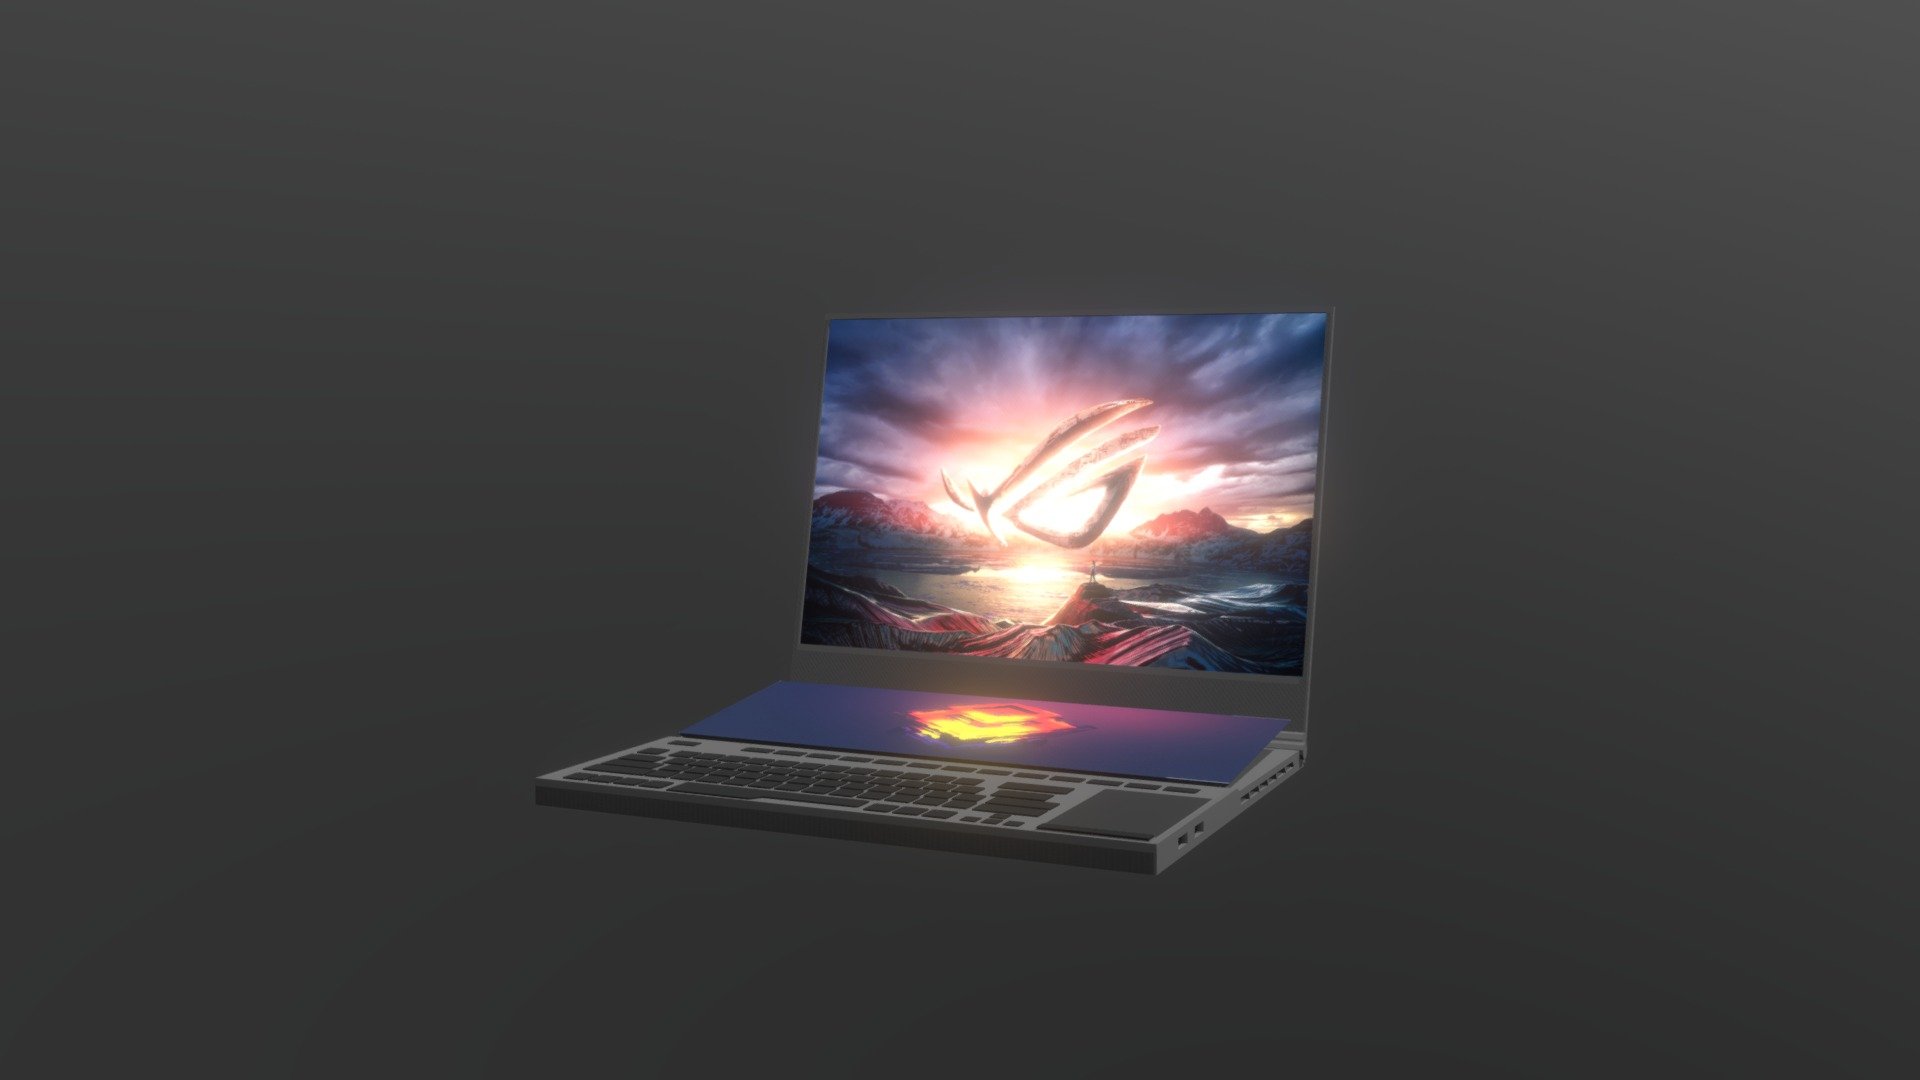 hi guys this is a low-poly and a low-detailed model of the new laptop from Asus, Rog Zephyrus Duo 15 laptop. this model is missing a lot of details but is good for low poly renders. the renders of this model is on my artstation portfolio, here's the link to the renders https://mkcg.artstation.com/projects/186EG3. i hope you like it, have a nice day 3d model